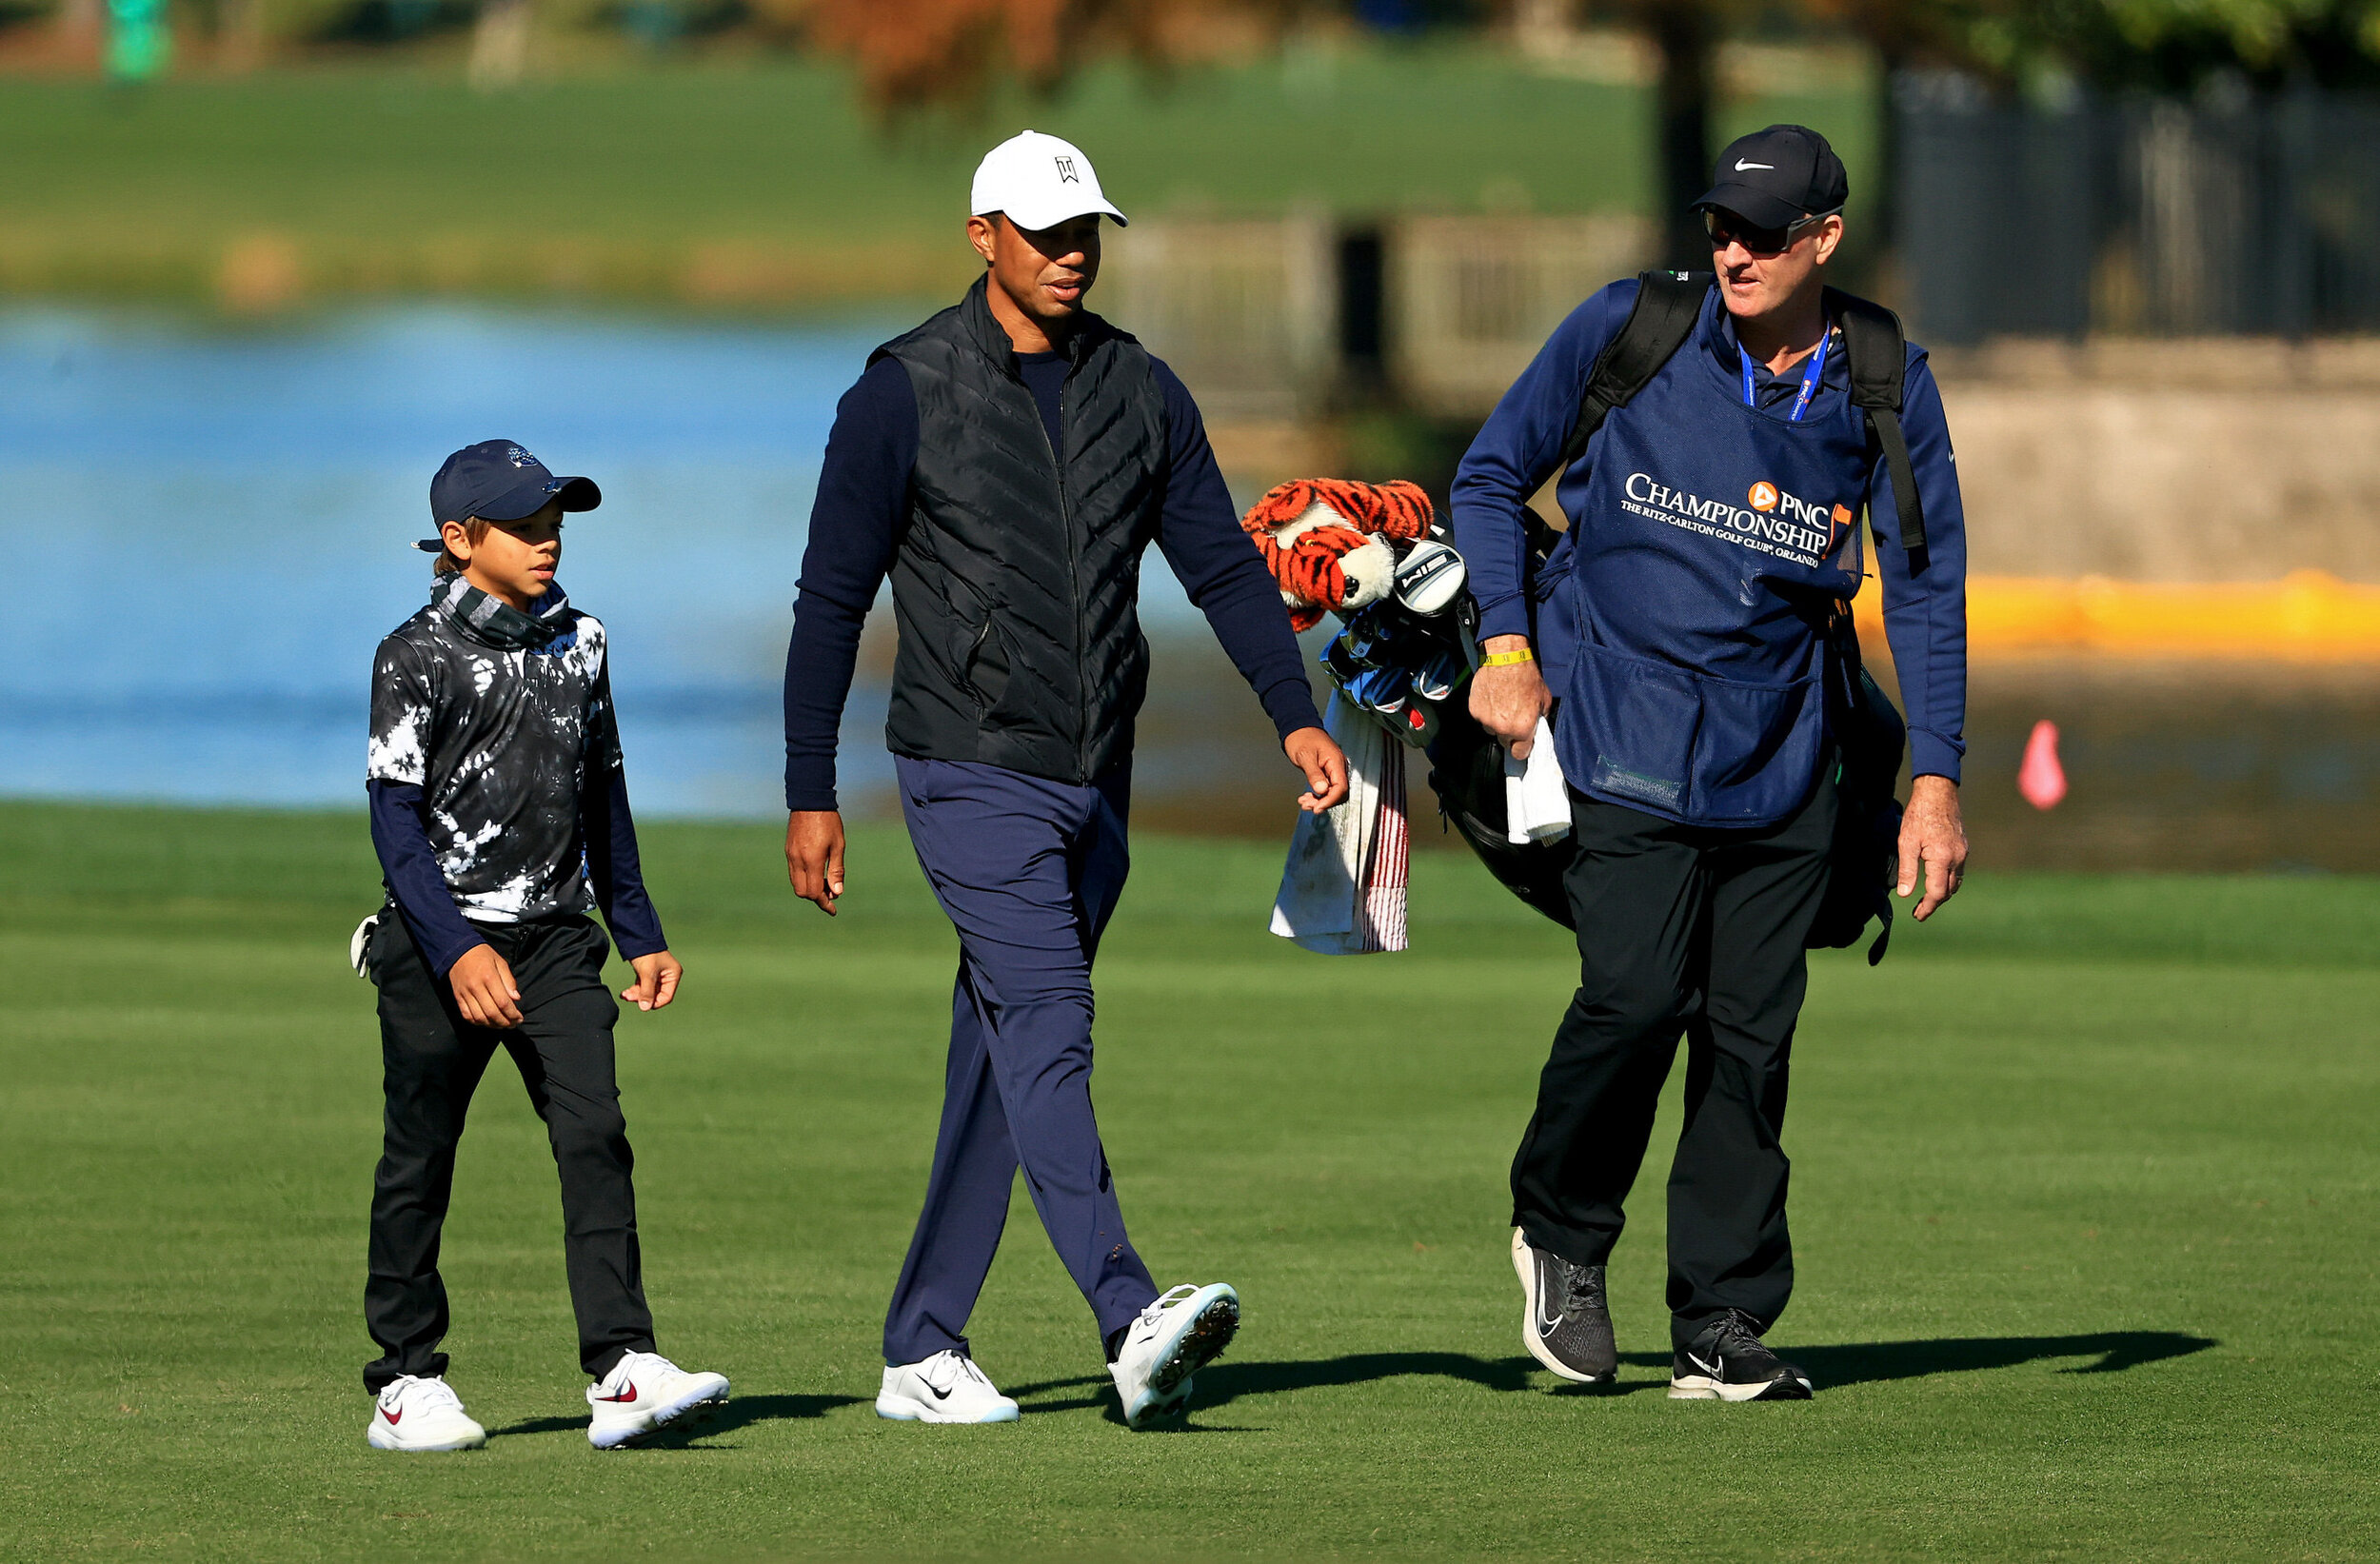  ORLANDO, FLORIDA - DECEMBER 18: Tiger Woods of the United States, son Charlie Woods, and caddie Joe LaCava  walk up the 18th hole during the Pro-Am for the PNC Championship at the Ritz Carlton Golf Club on December 18, 2020 in Orlando, Florida. (Pho